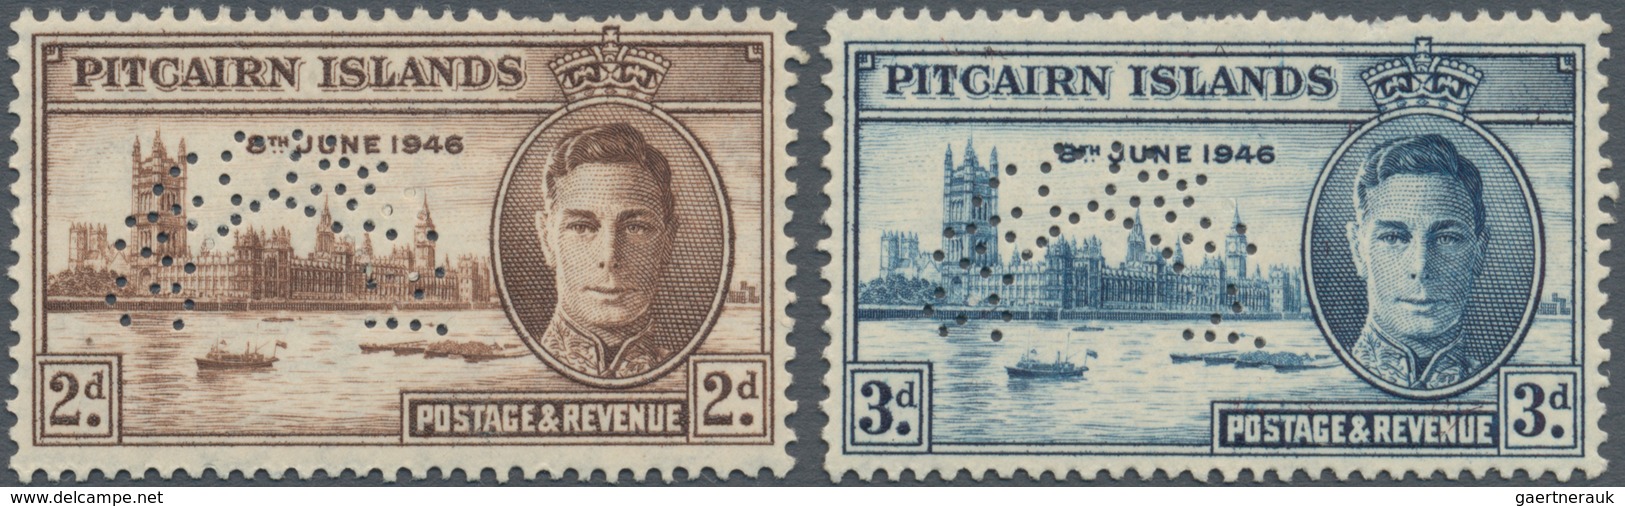 Pitcairn: 1946, Victory Issue Complete Set Of Two Perf. SPECIMEN, Mint Never Hinged But Perf. Proble - Pitcairneilanden